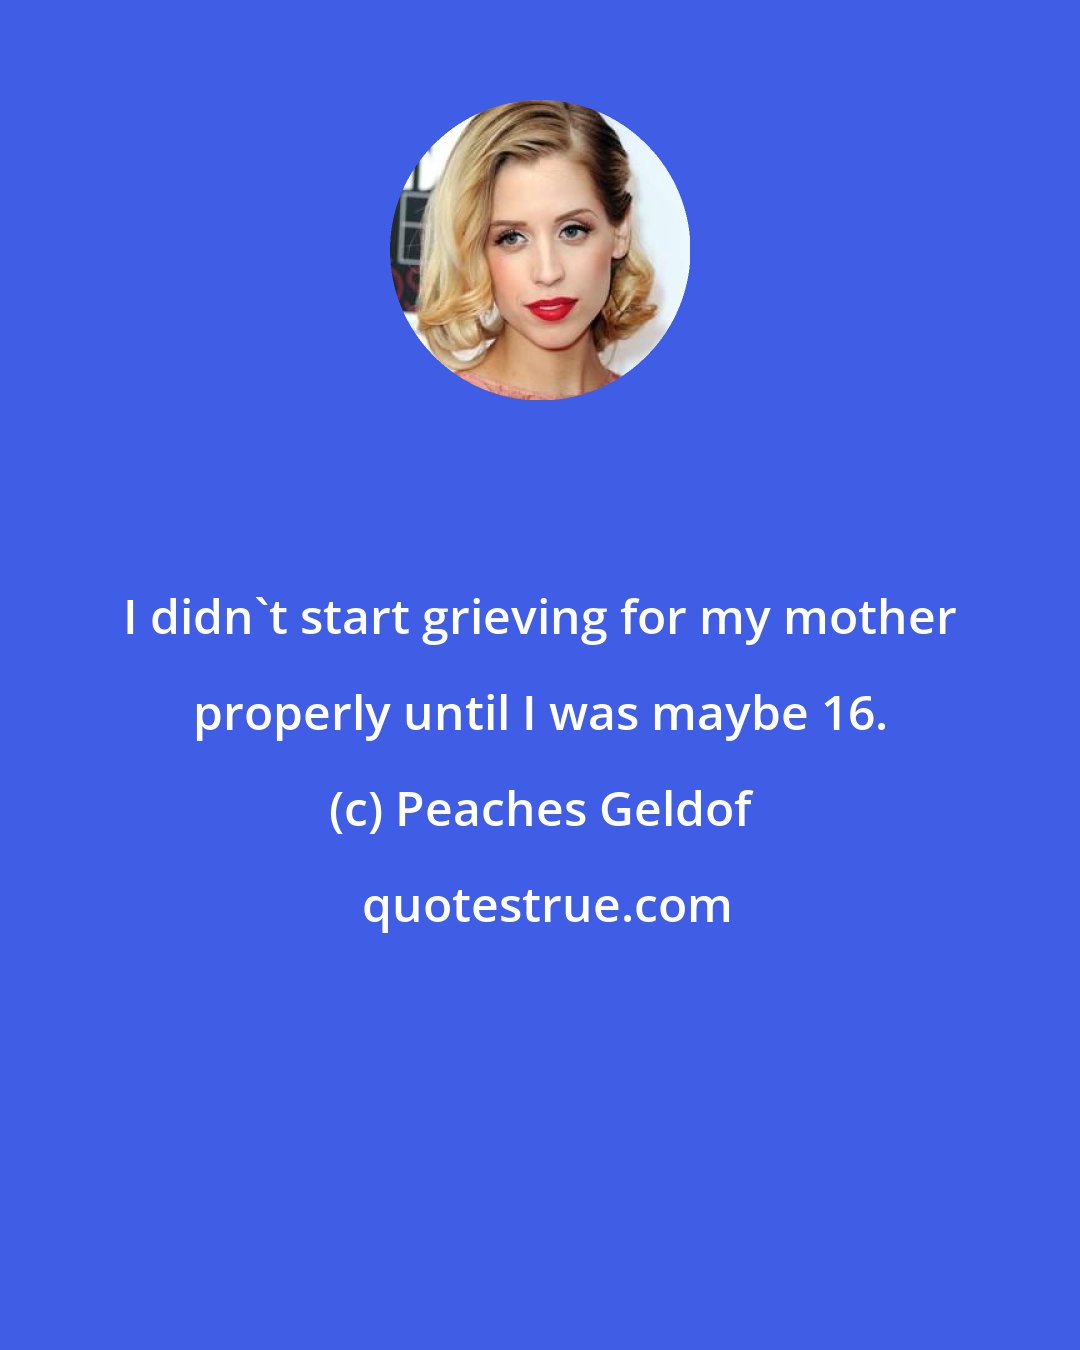 Peaches Geldof: I didn't start grieving for my mother properly until I was maybe 16.